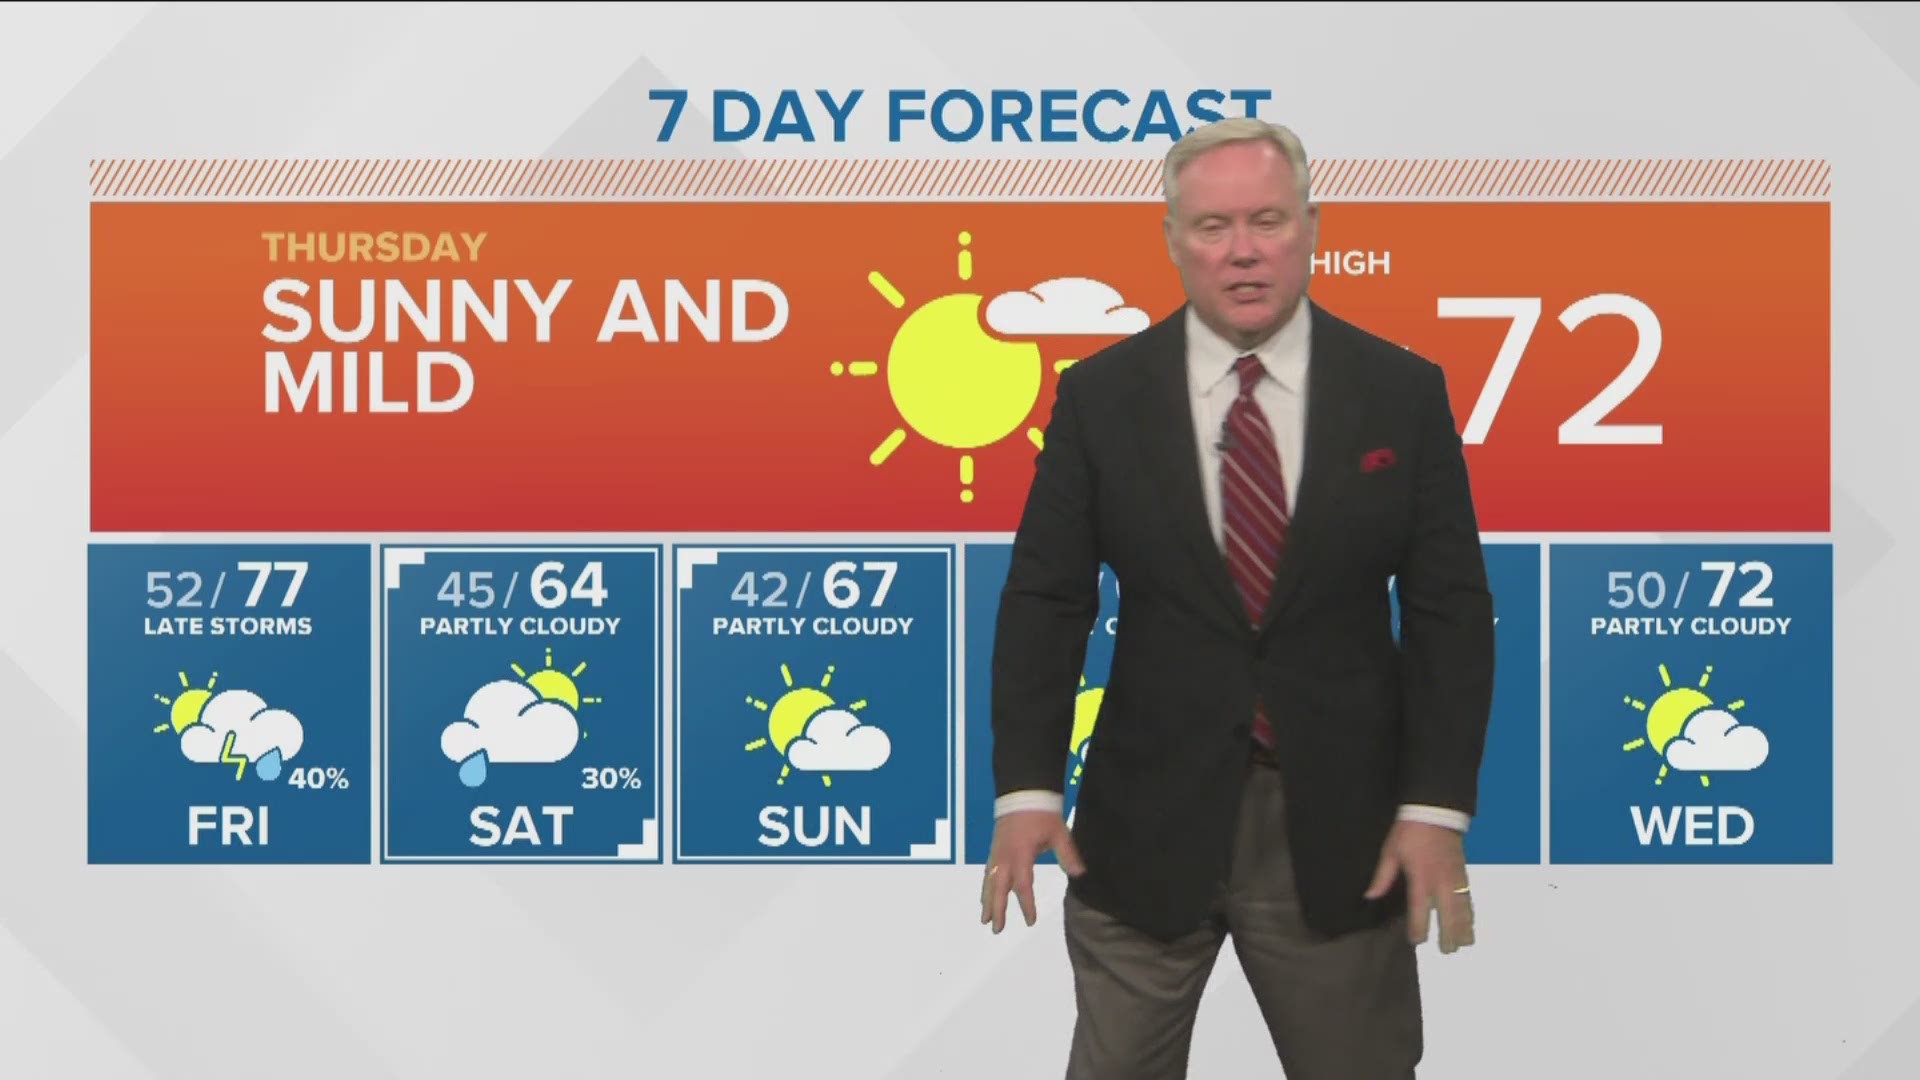 Rick Lantz says temperatures are rising to the warmest day of the year on Friday.